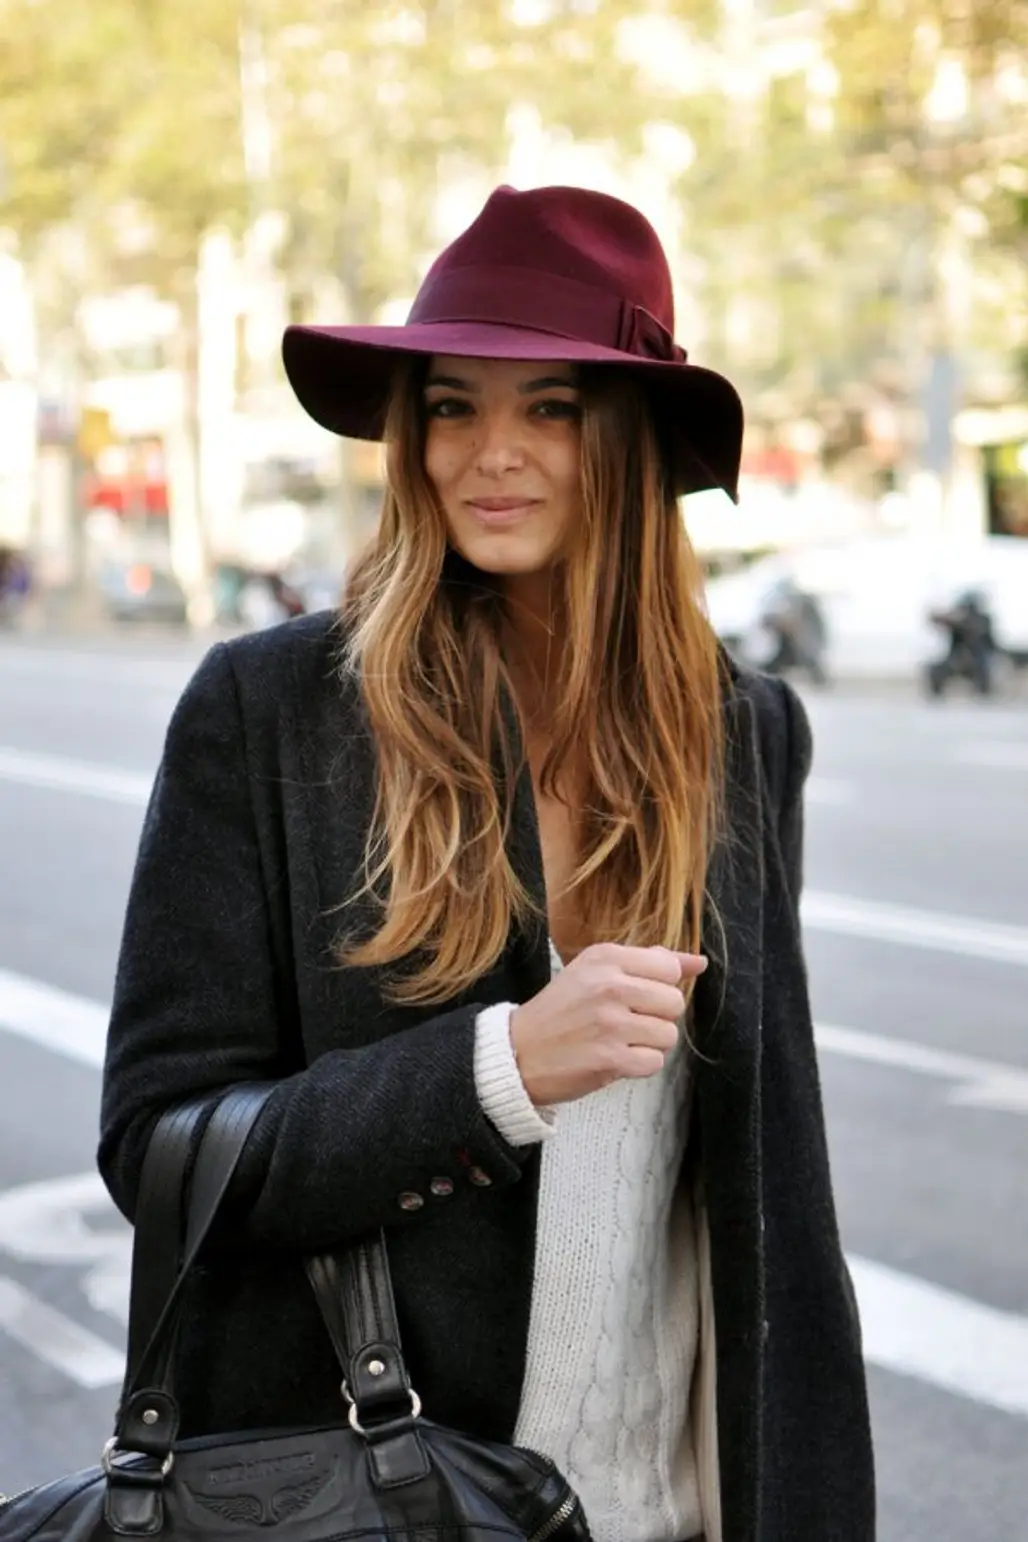 Make Your Hat a Part of Your Outfit